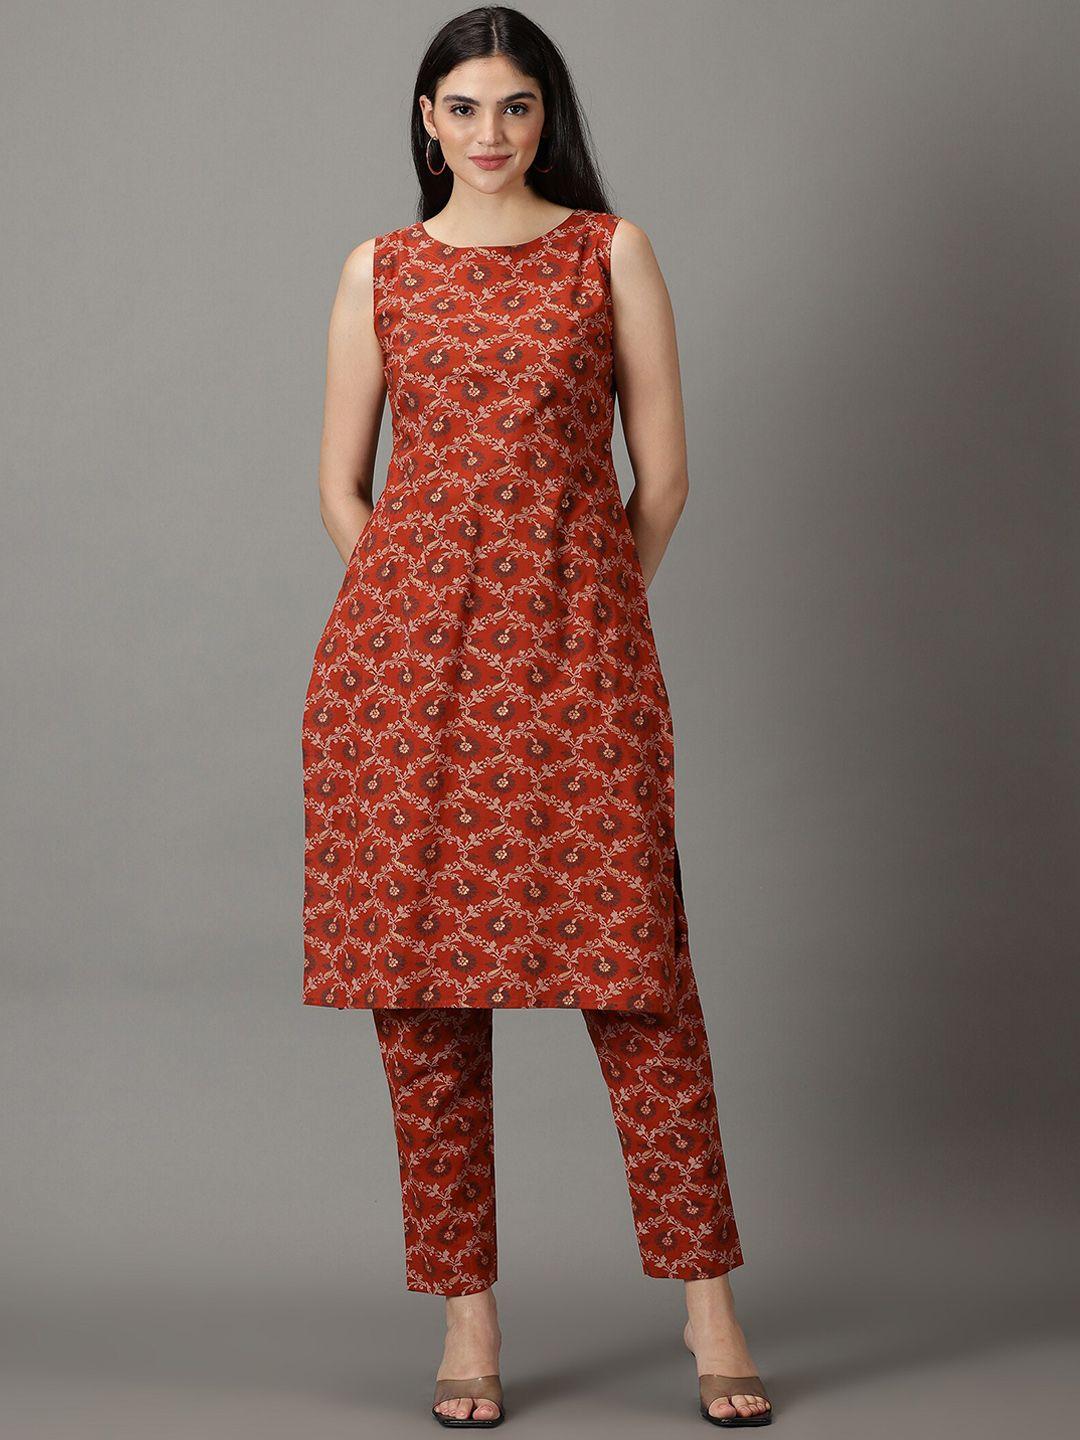 divination floral printed pure cotton kurta with trousers